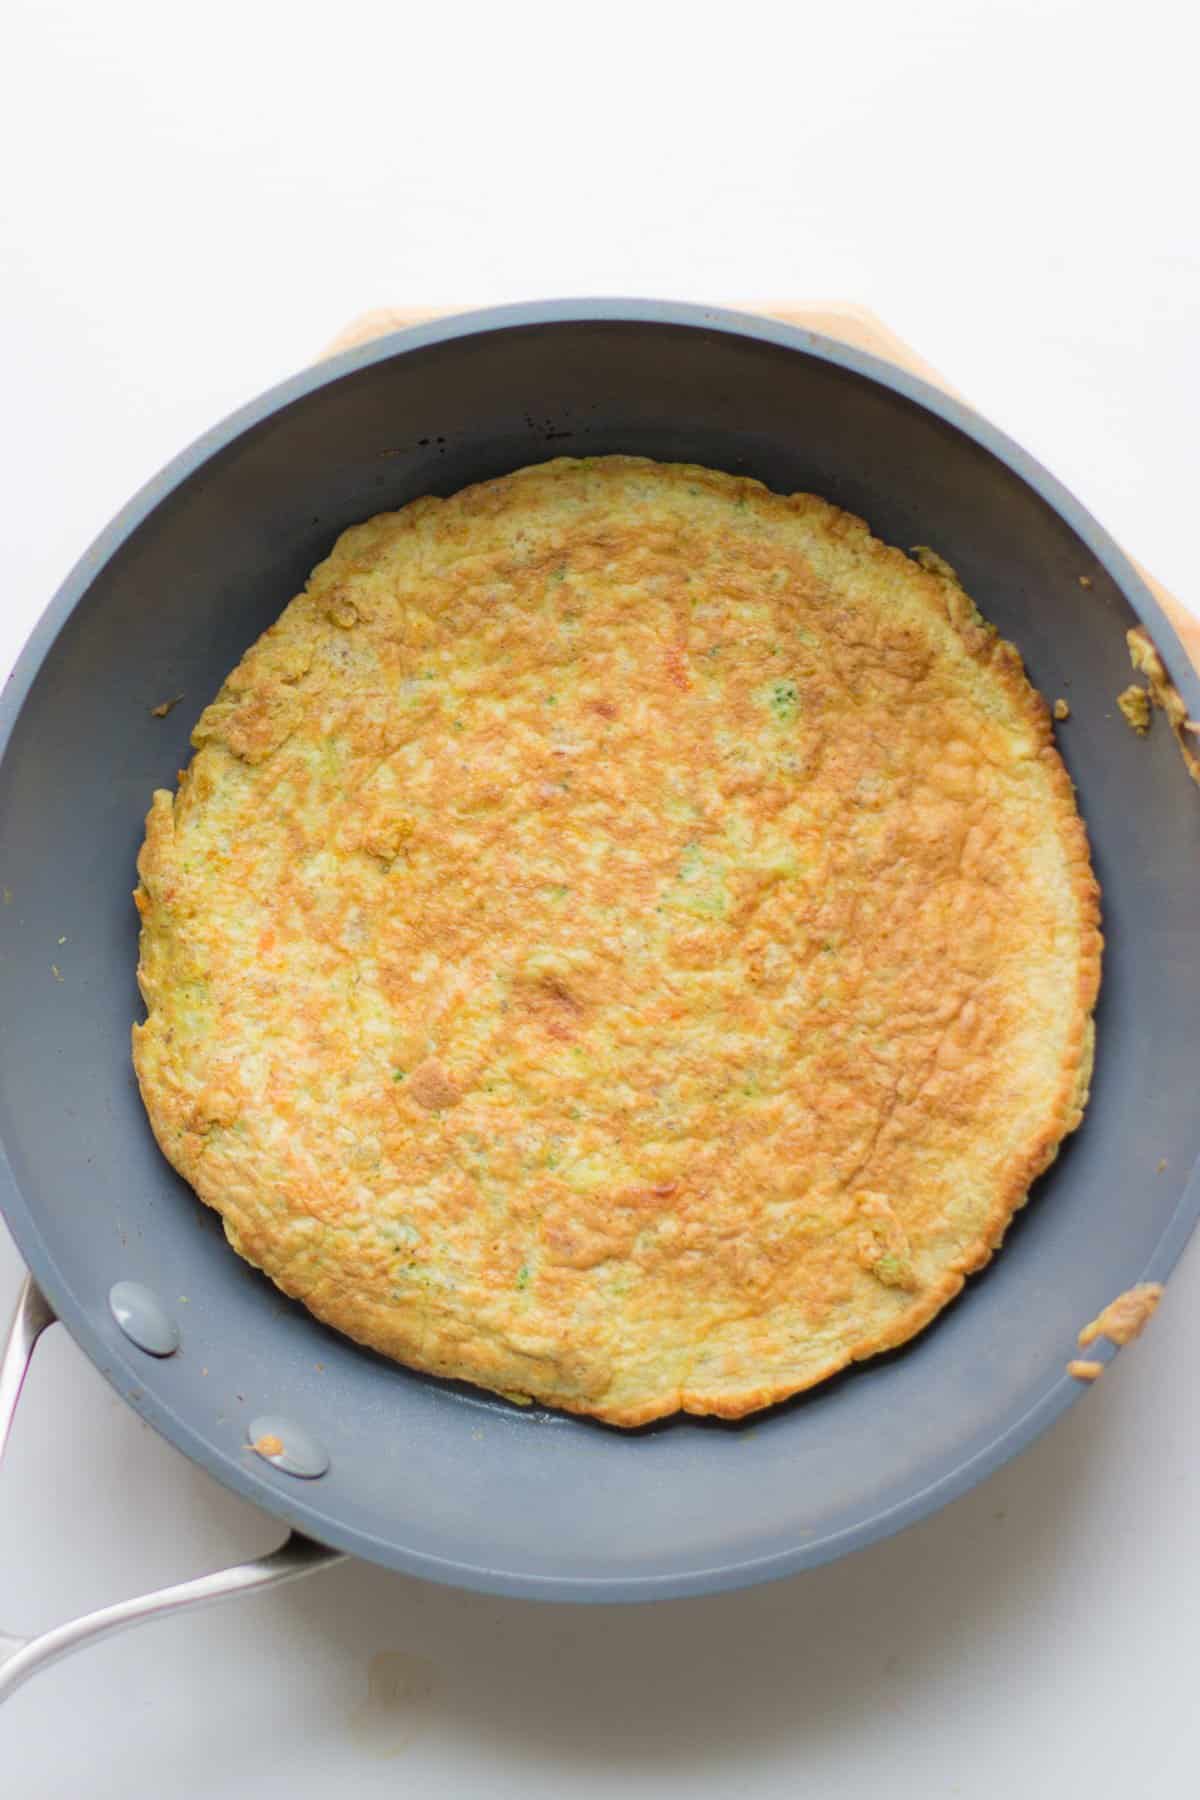 cooked omelette in a nonstick pan.